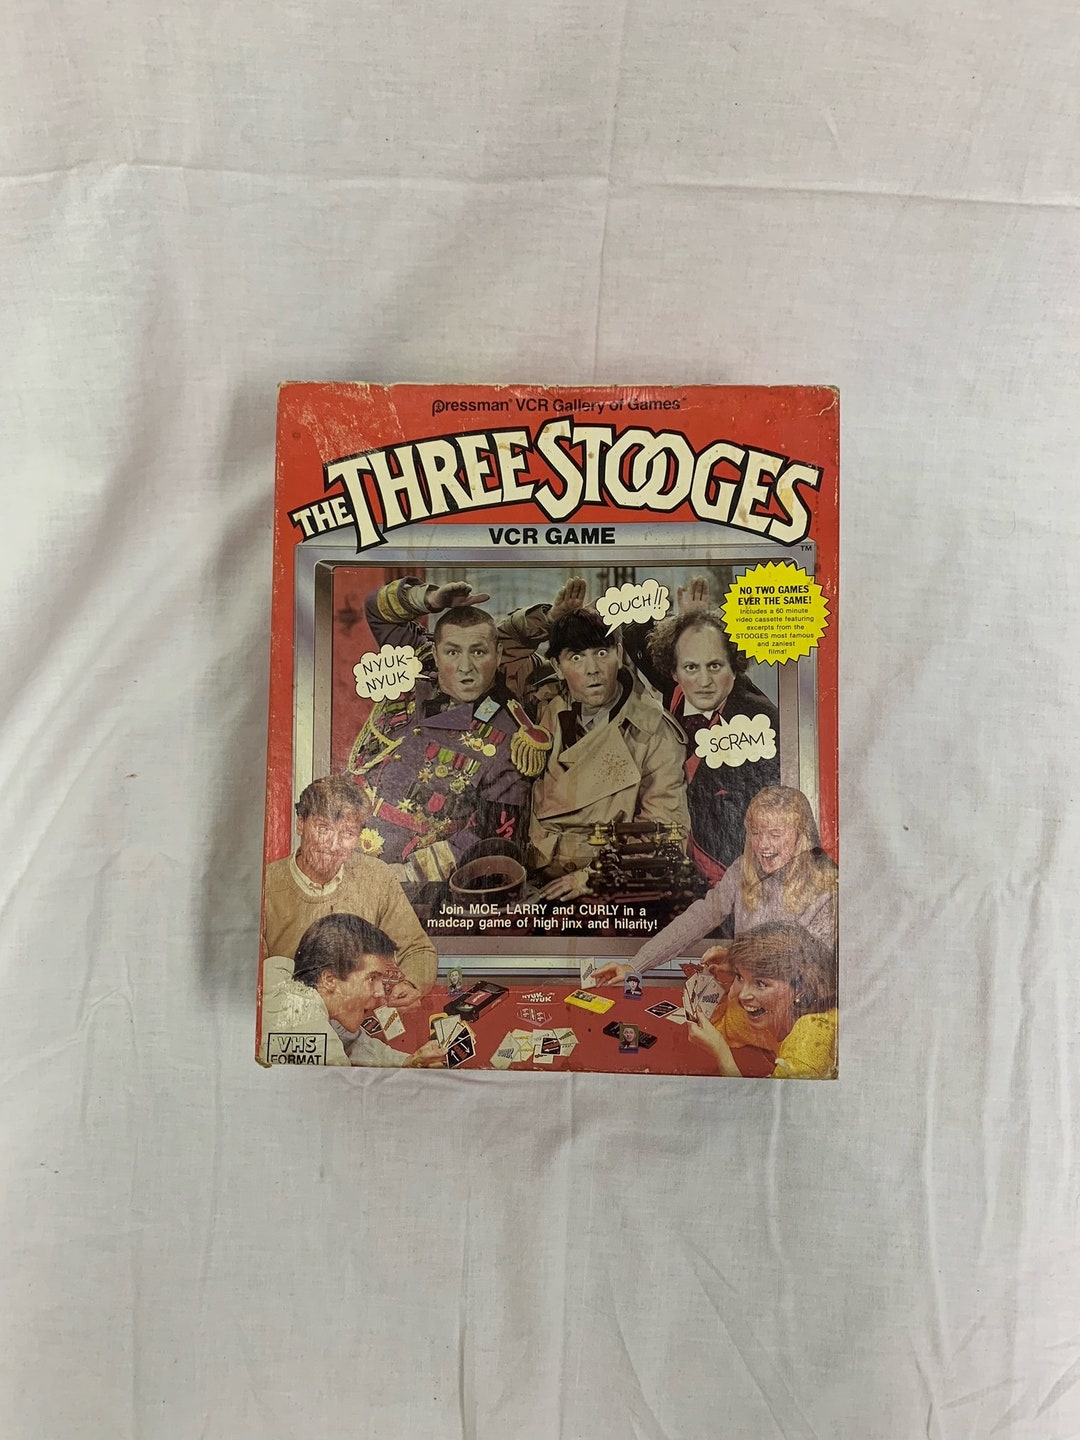 Vintage / Retro 1986 the Three Stooges VCR Game Board Game by Pressman ...